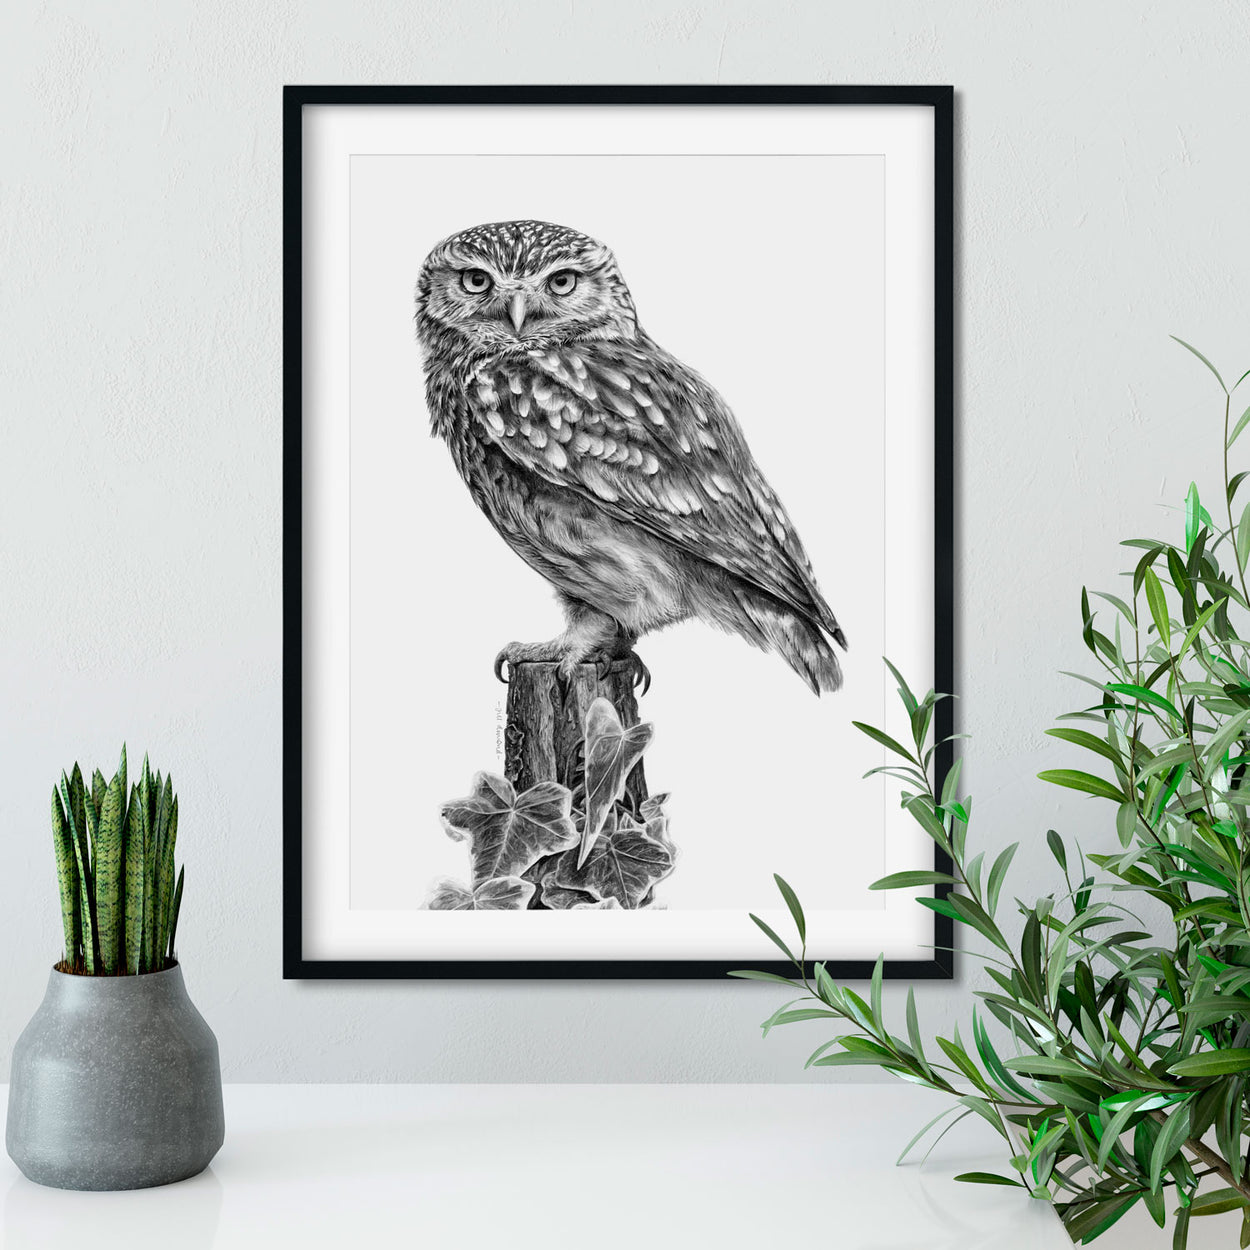 Little Owl Drawing on Wall - The Thriving Wild